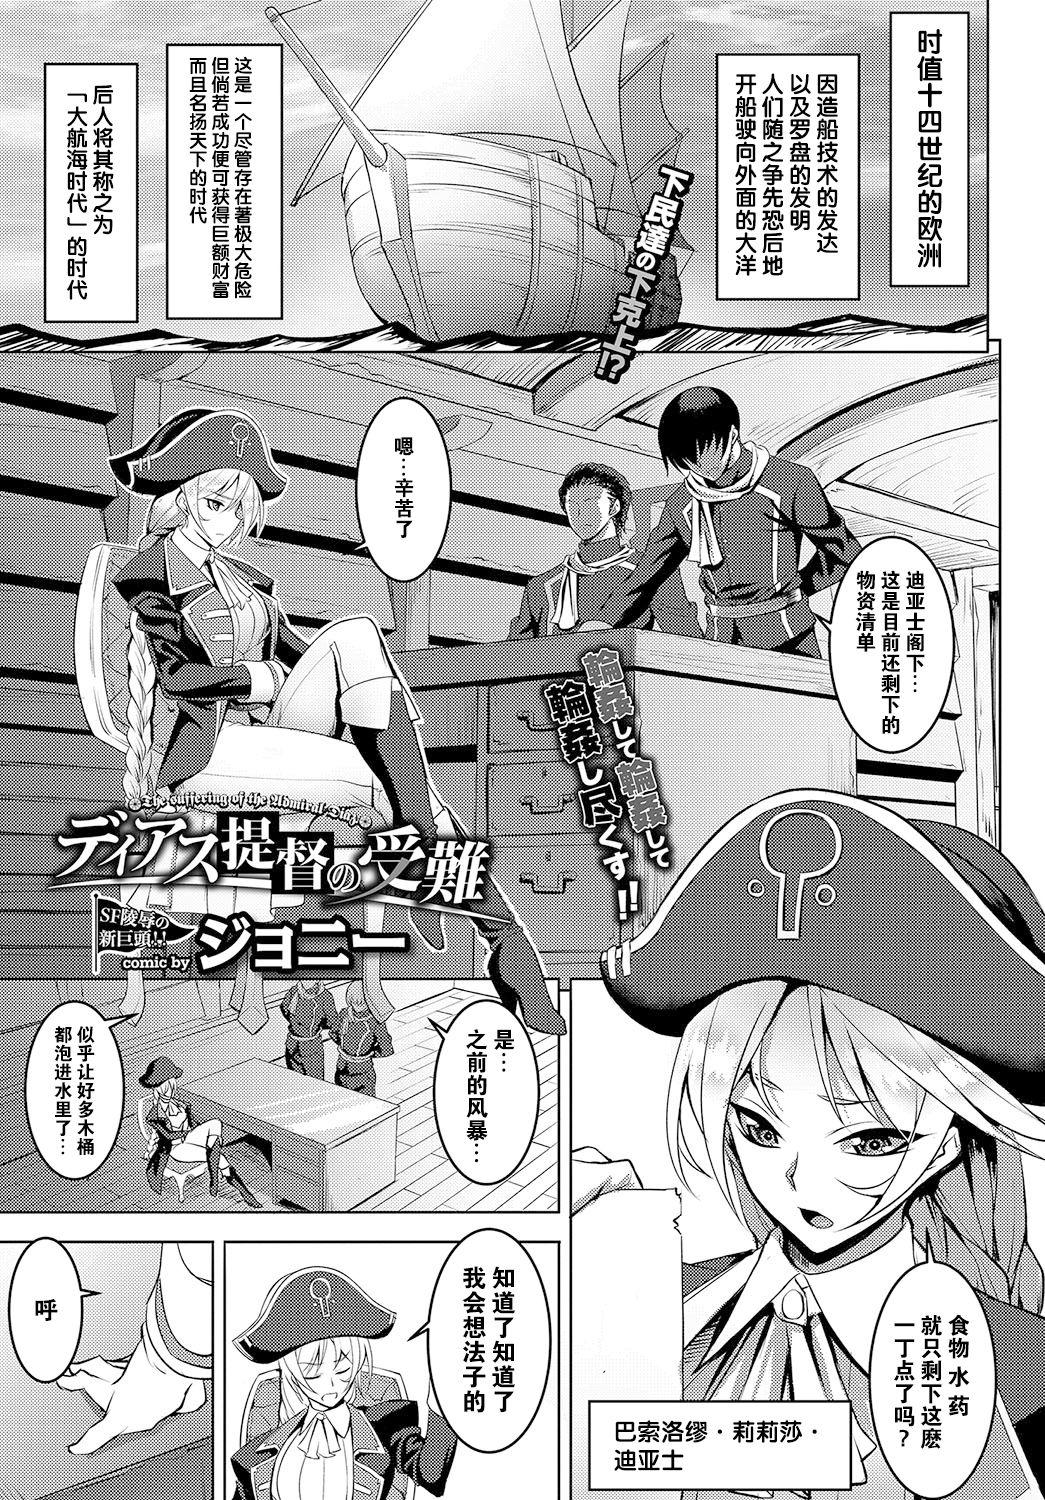 Amateur Porn Free Diaz Teitoku no Junan - The suffering of the Admiral Diaz Gaygroup - Page 2